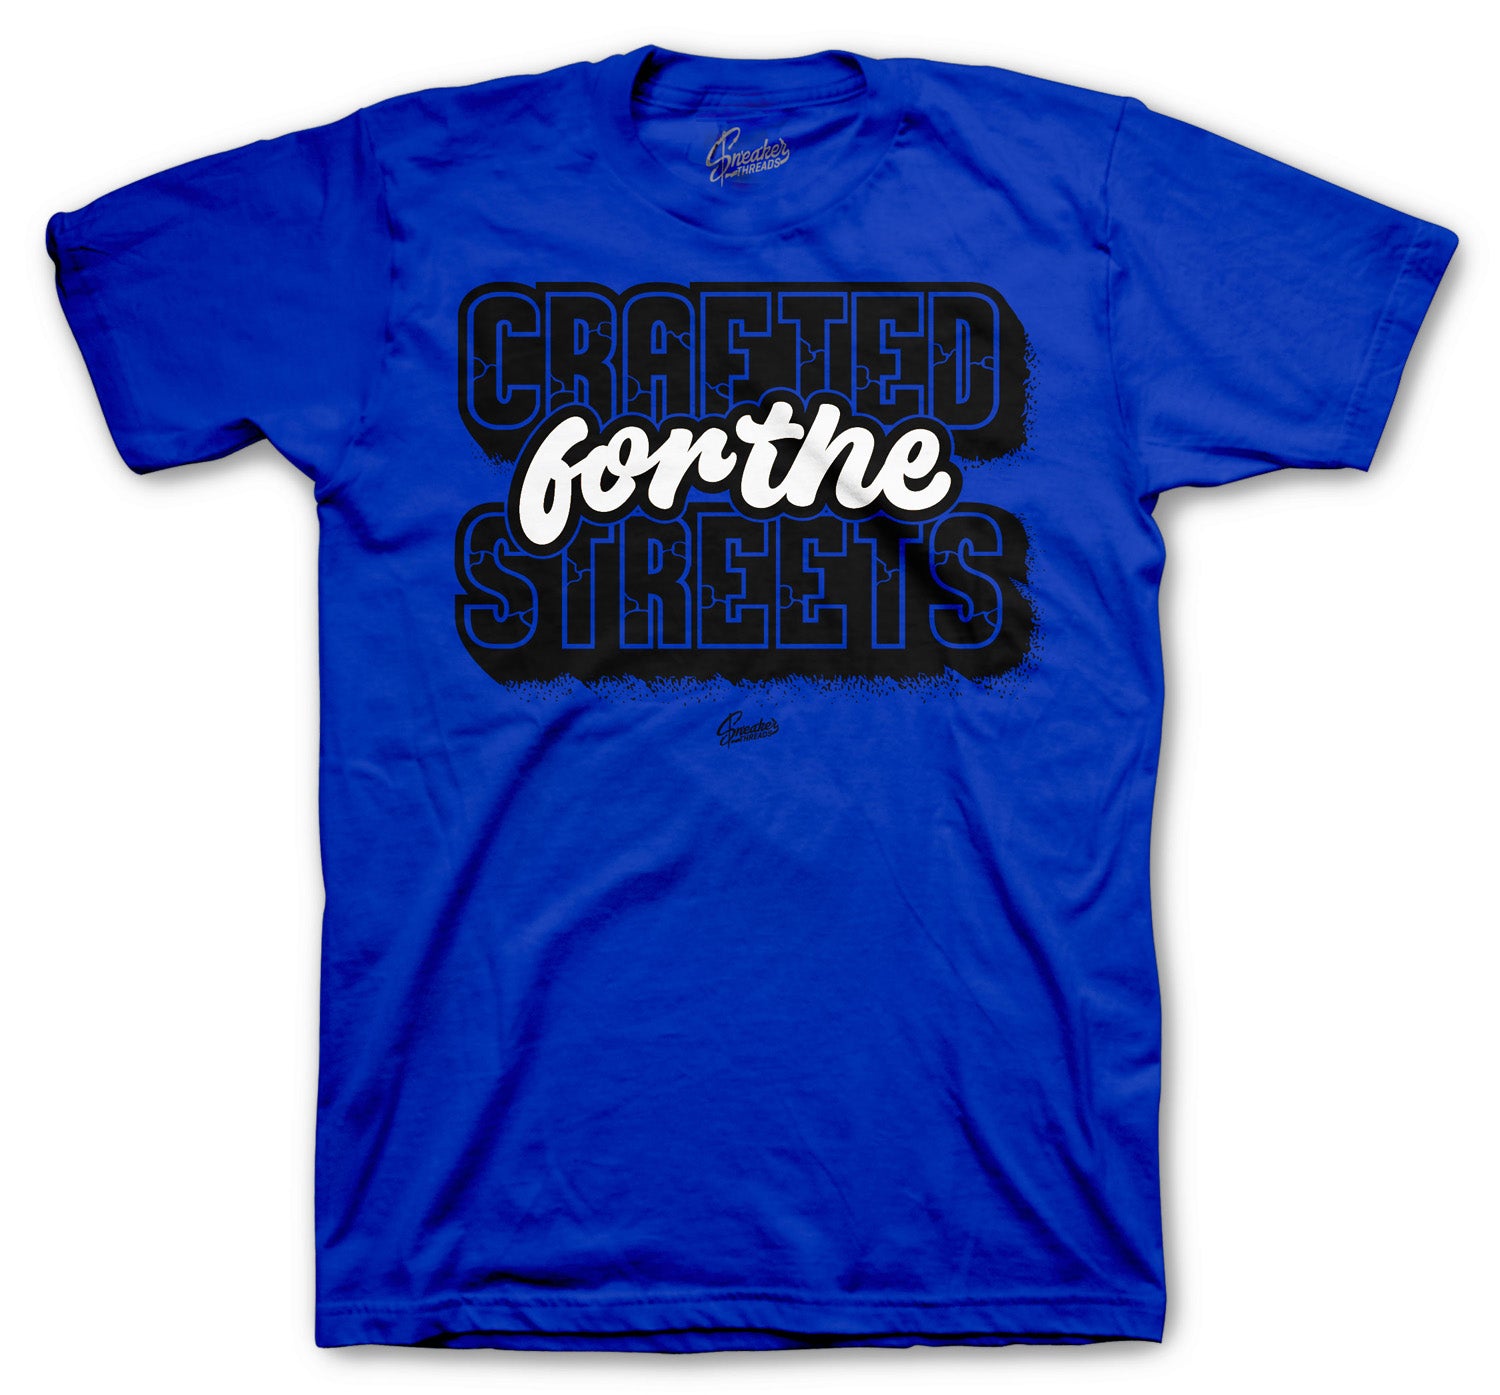 Game royal Jordan 12 sneaker collection has matching shirts designed to match the game royal collection